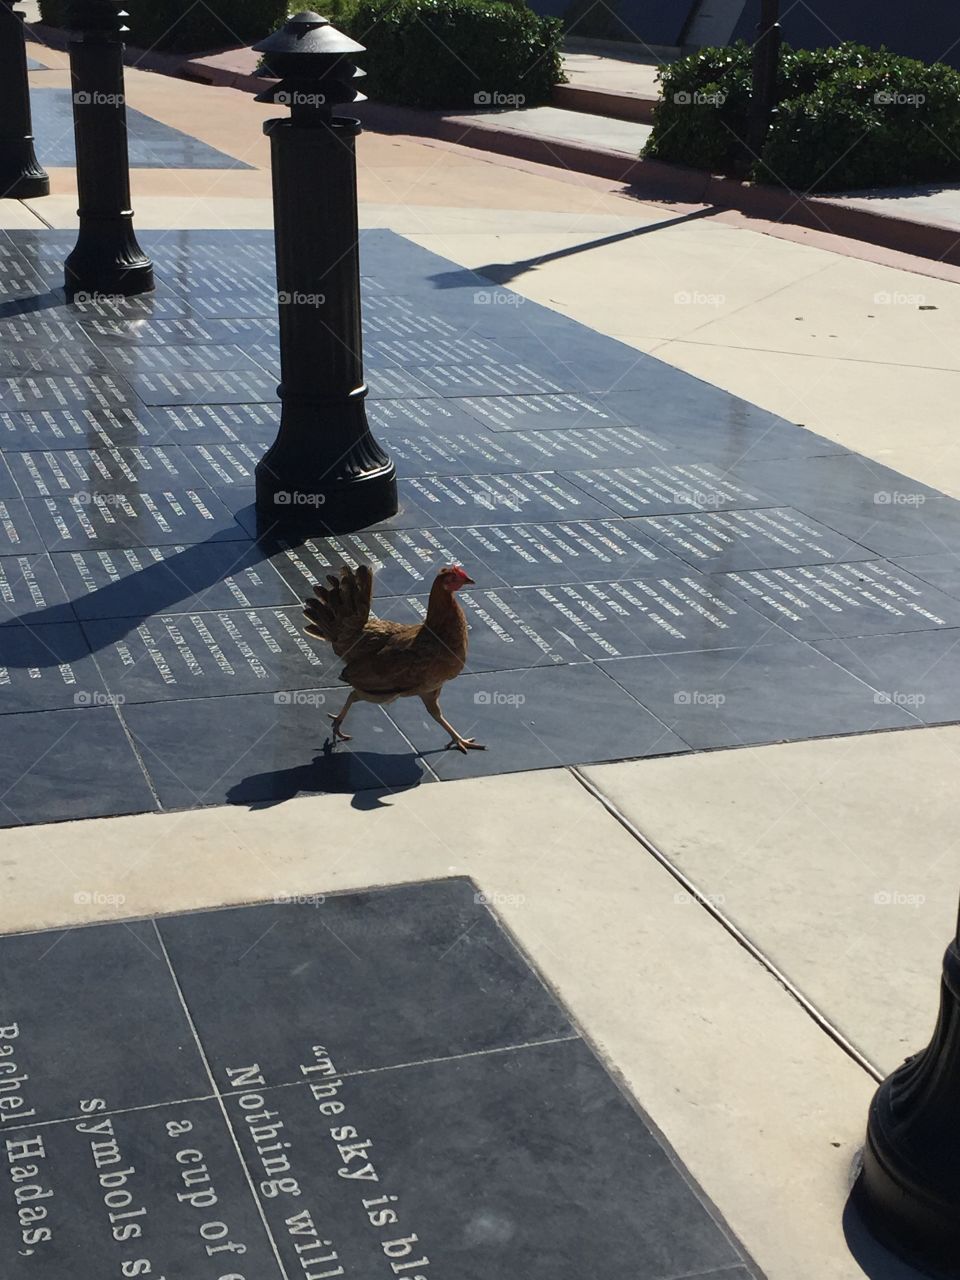 Why did the chicken cross the road? Key West, FL. 